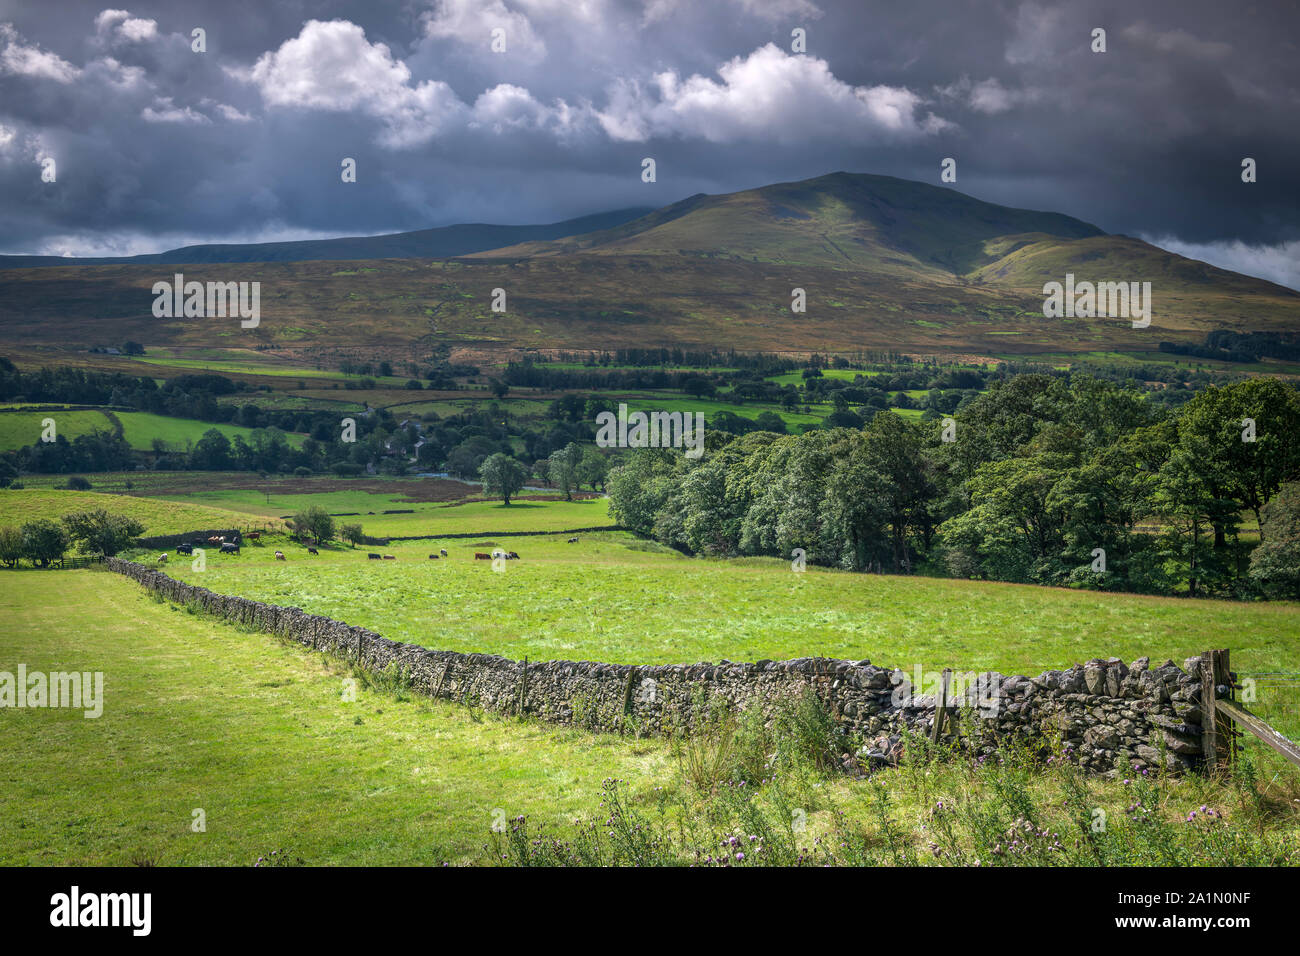 The Lake District, Cumbria, North West England. Shafts of sunlight light up a drystone wall and copse of trees beyond, as gathering storm clouds start Stock Photo